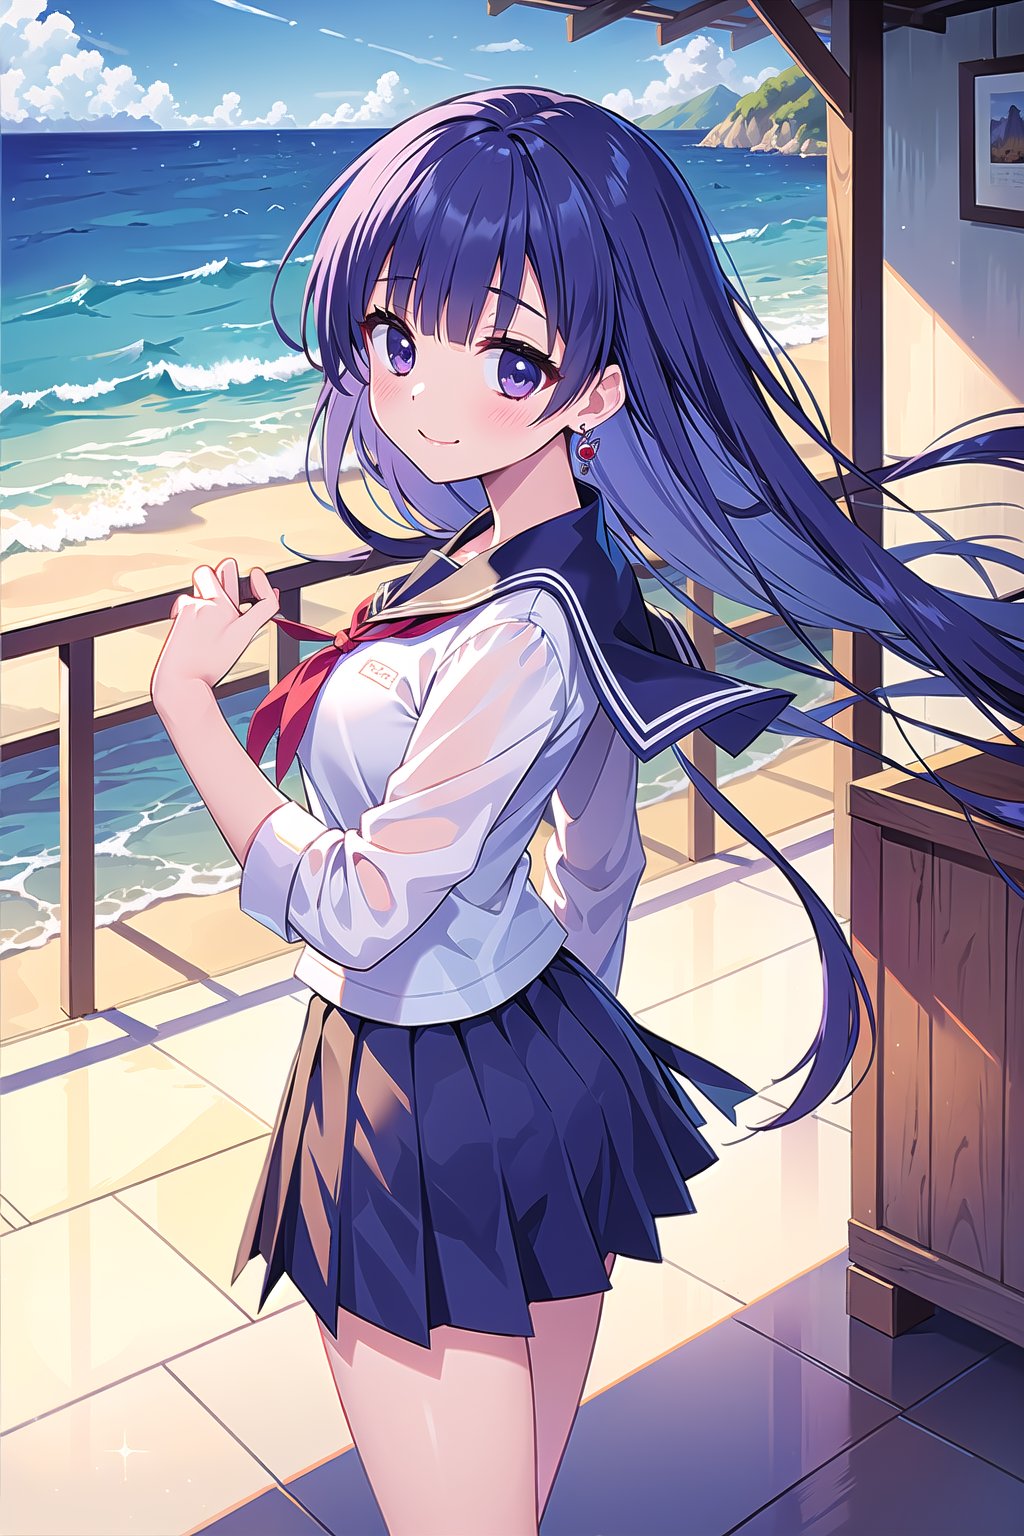 (masterpiece, Best  Quality,  High Quality,  Best Picture Quality Score: 1.3),  (Sharp Picture Quality),  Perfect Beauty: 1.5,purple hair,long hair,  (School Uniform),  One,  Beautiful Girl,long Skirt, Very Beautiful View,Navy blue pleated skirt ,Fluttering Skirt, (Most fantastic view) ,best smile,(Summer Scenery),visible panties ,(Tied hair),One earring,Front angle, station platform, seaside station, thin legs